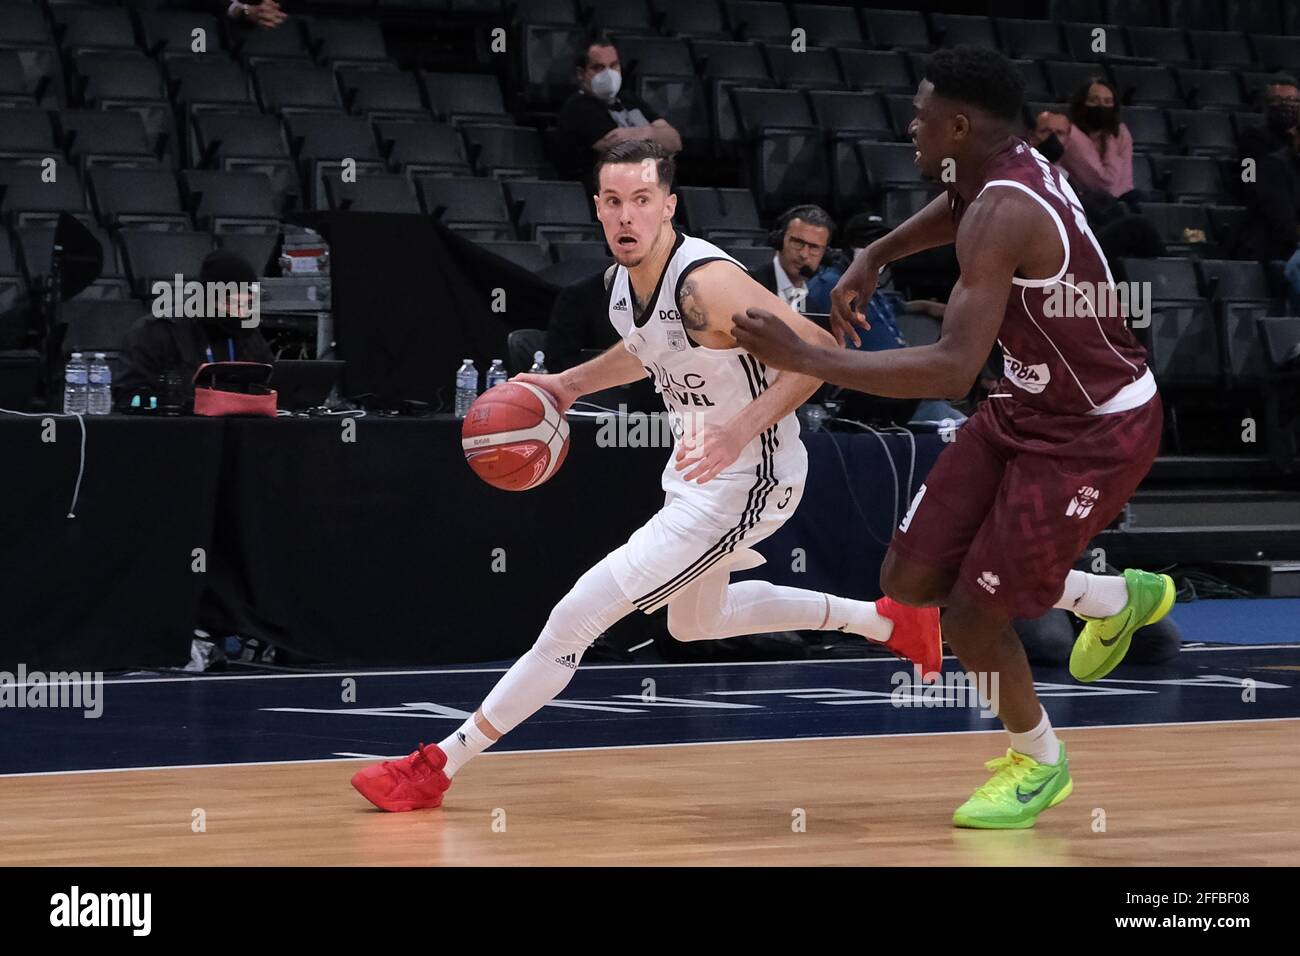 Levallois, Hauts de Seine, France. 24th Apr, 2021. PAUL LACOMBE (FRA) point  guard of ASVEL LDLC in action during the French Cup of Basketball between  Dijon and Lyon-Villeurbanne ASVEL LDLC (Tony Parker